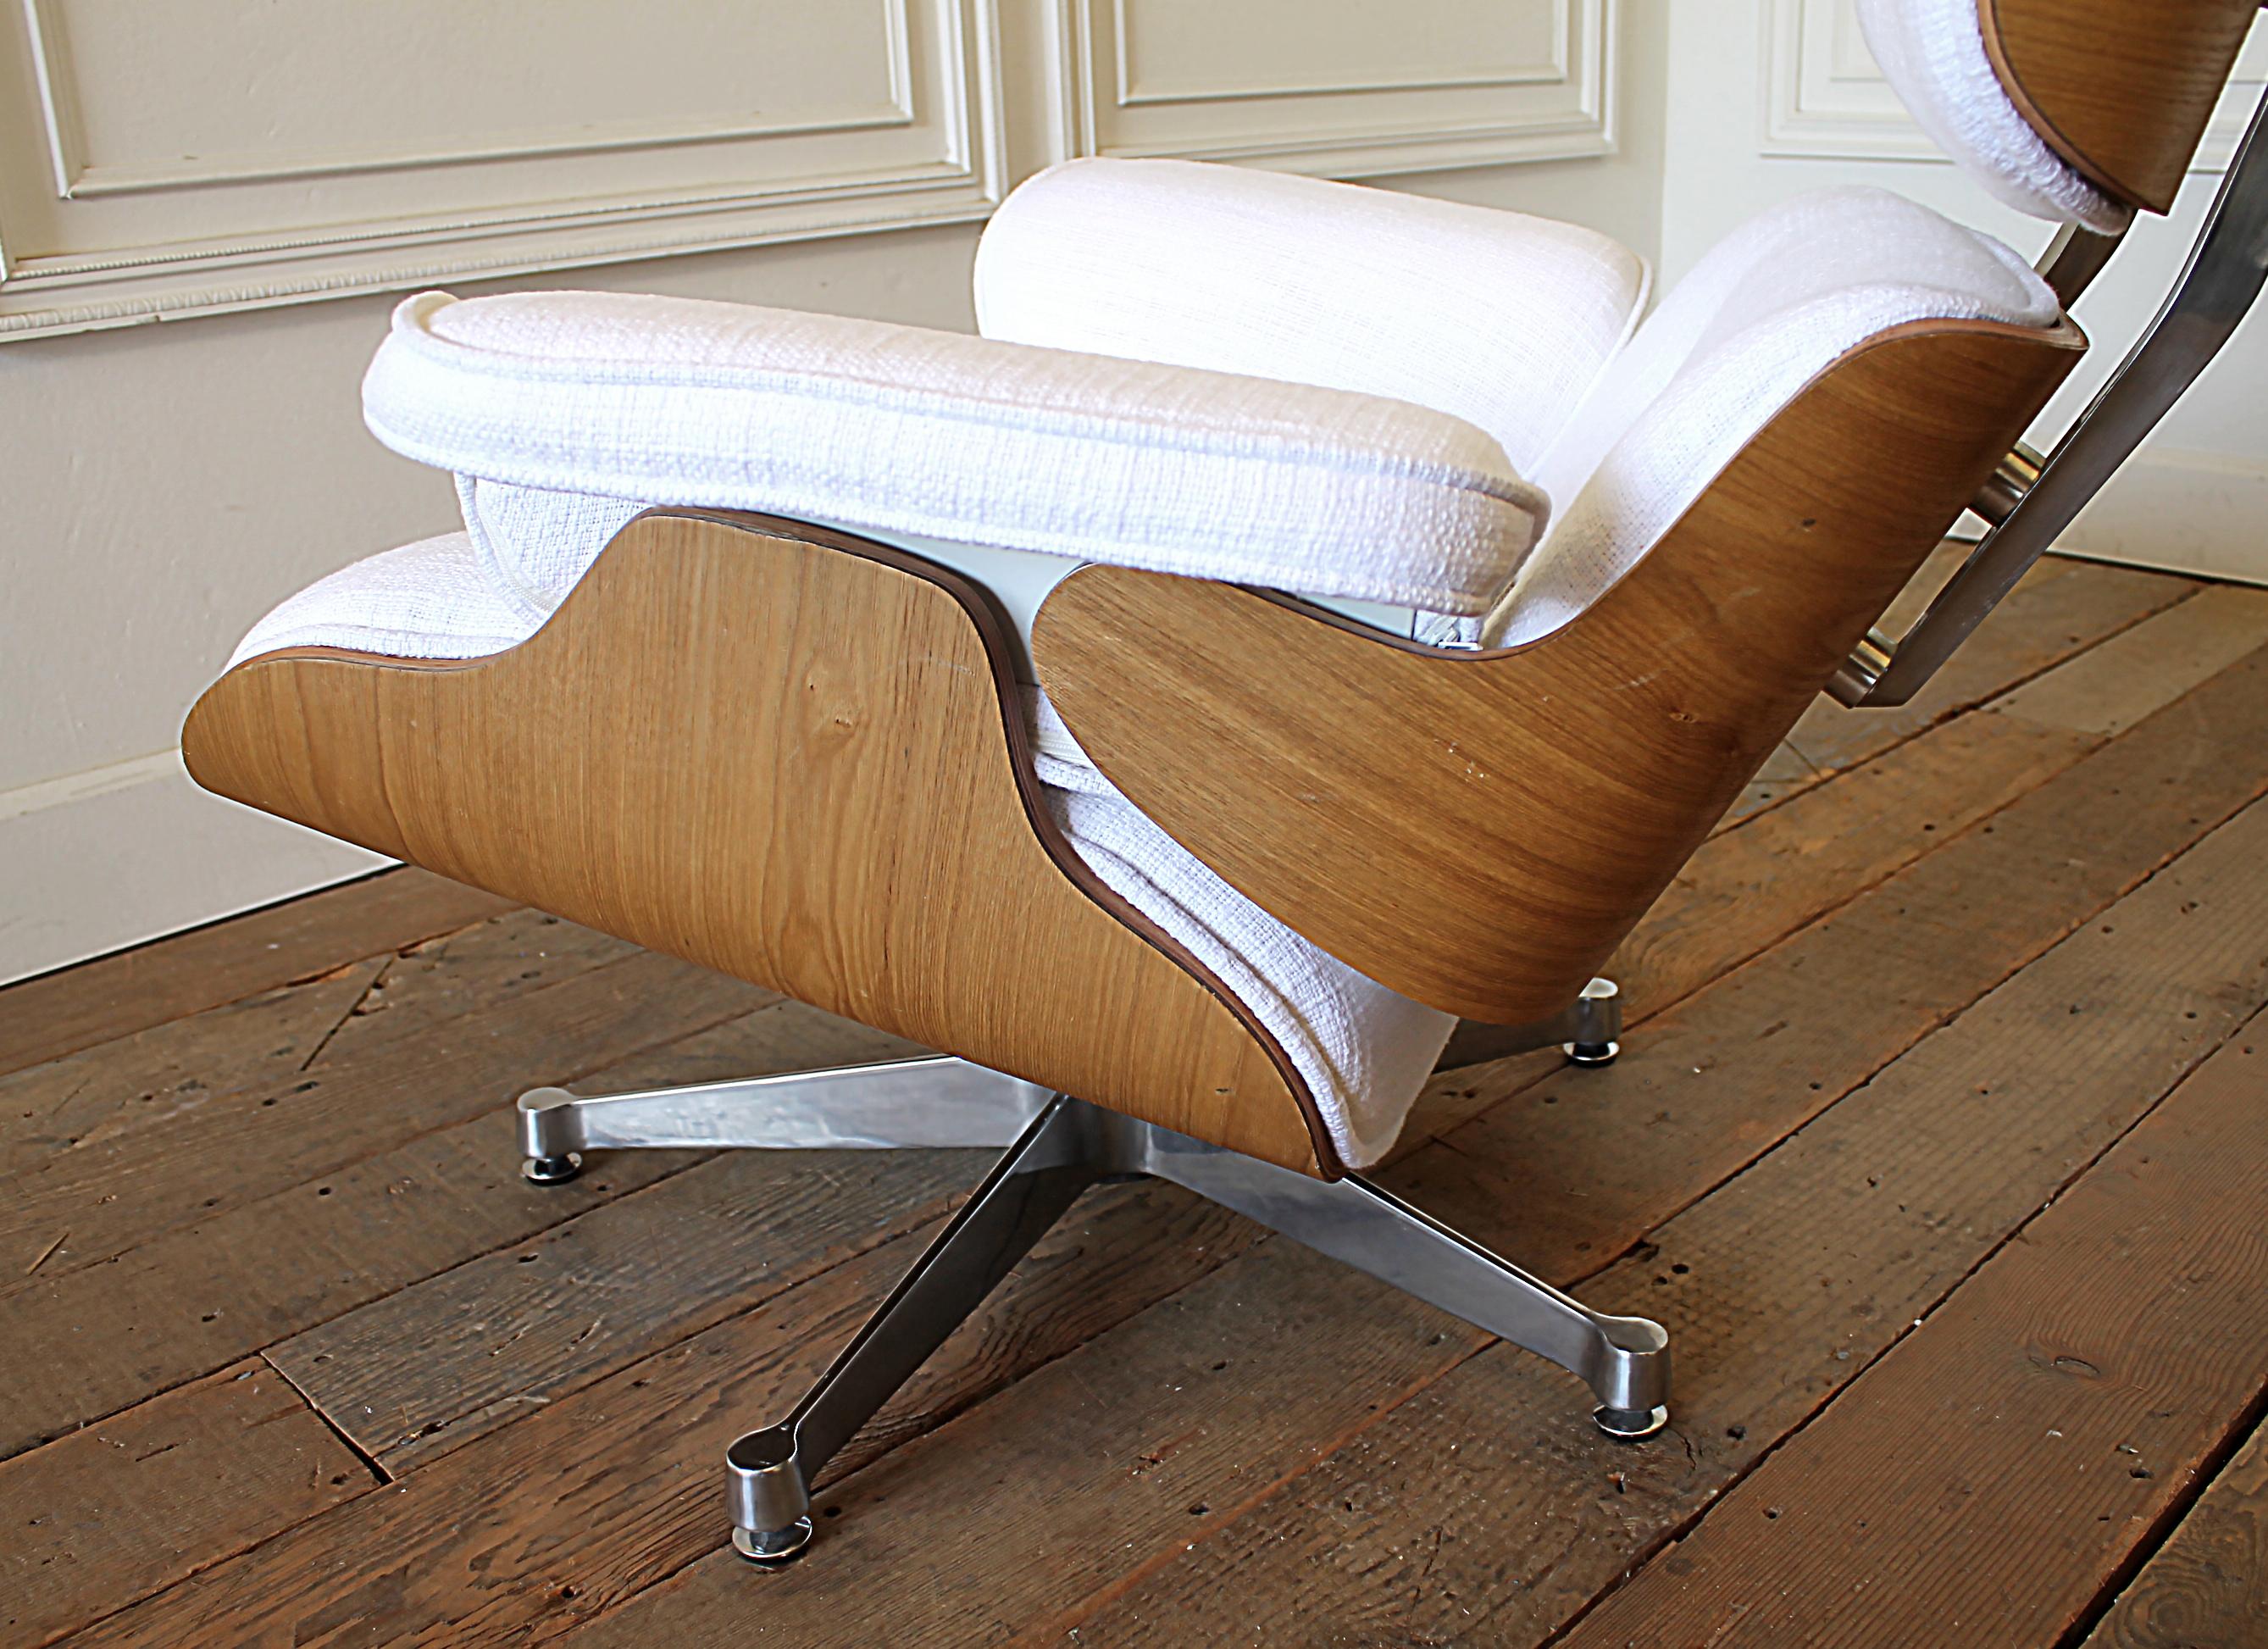 Eames Style Chair and Ottoman in Coated White Linen Blend Upholstery 5